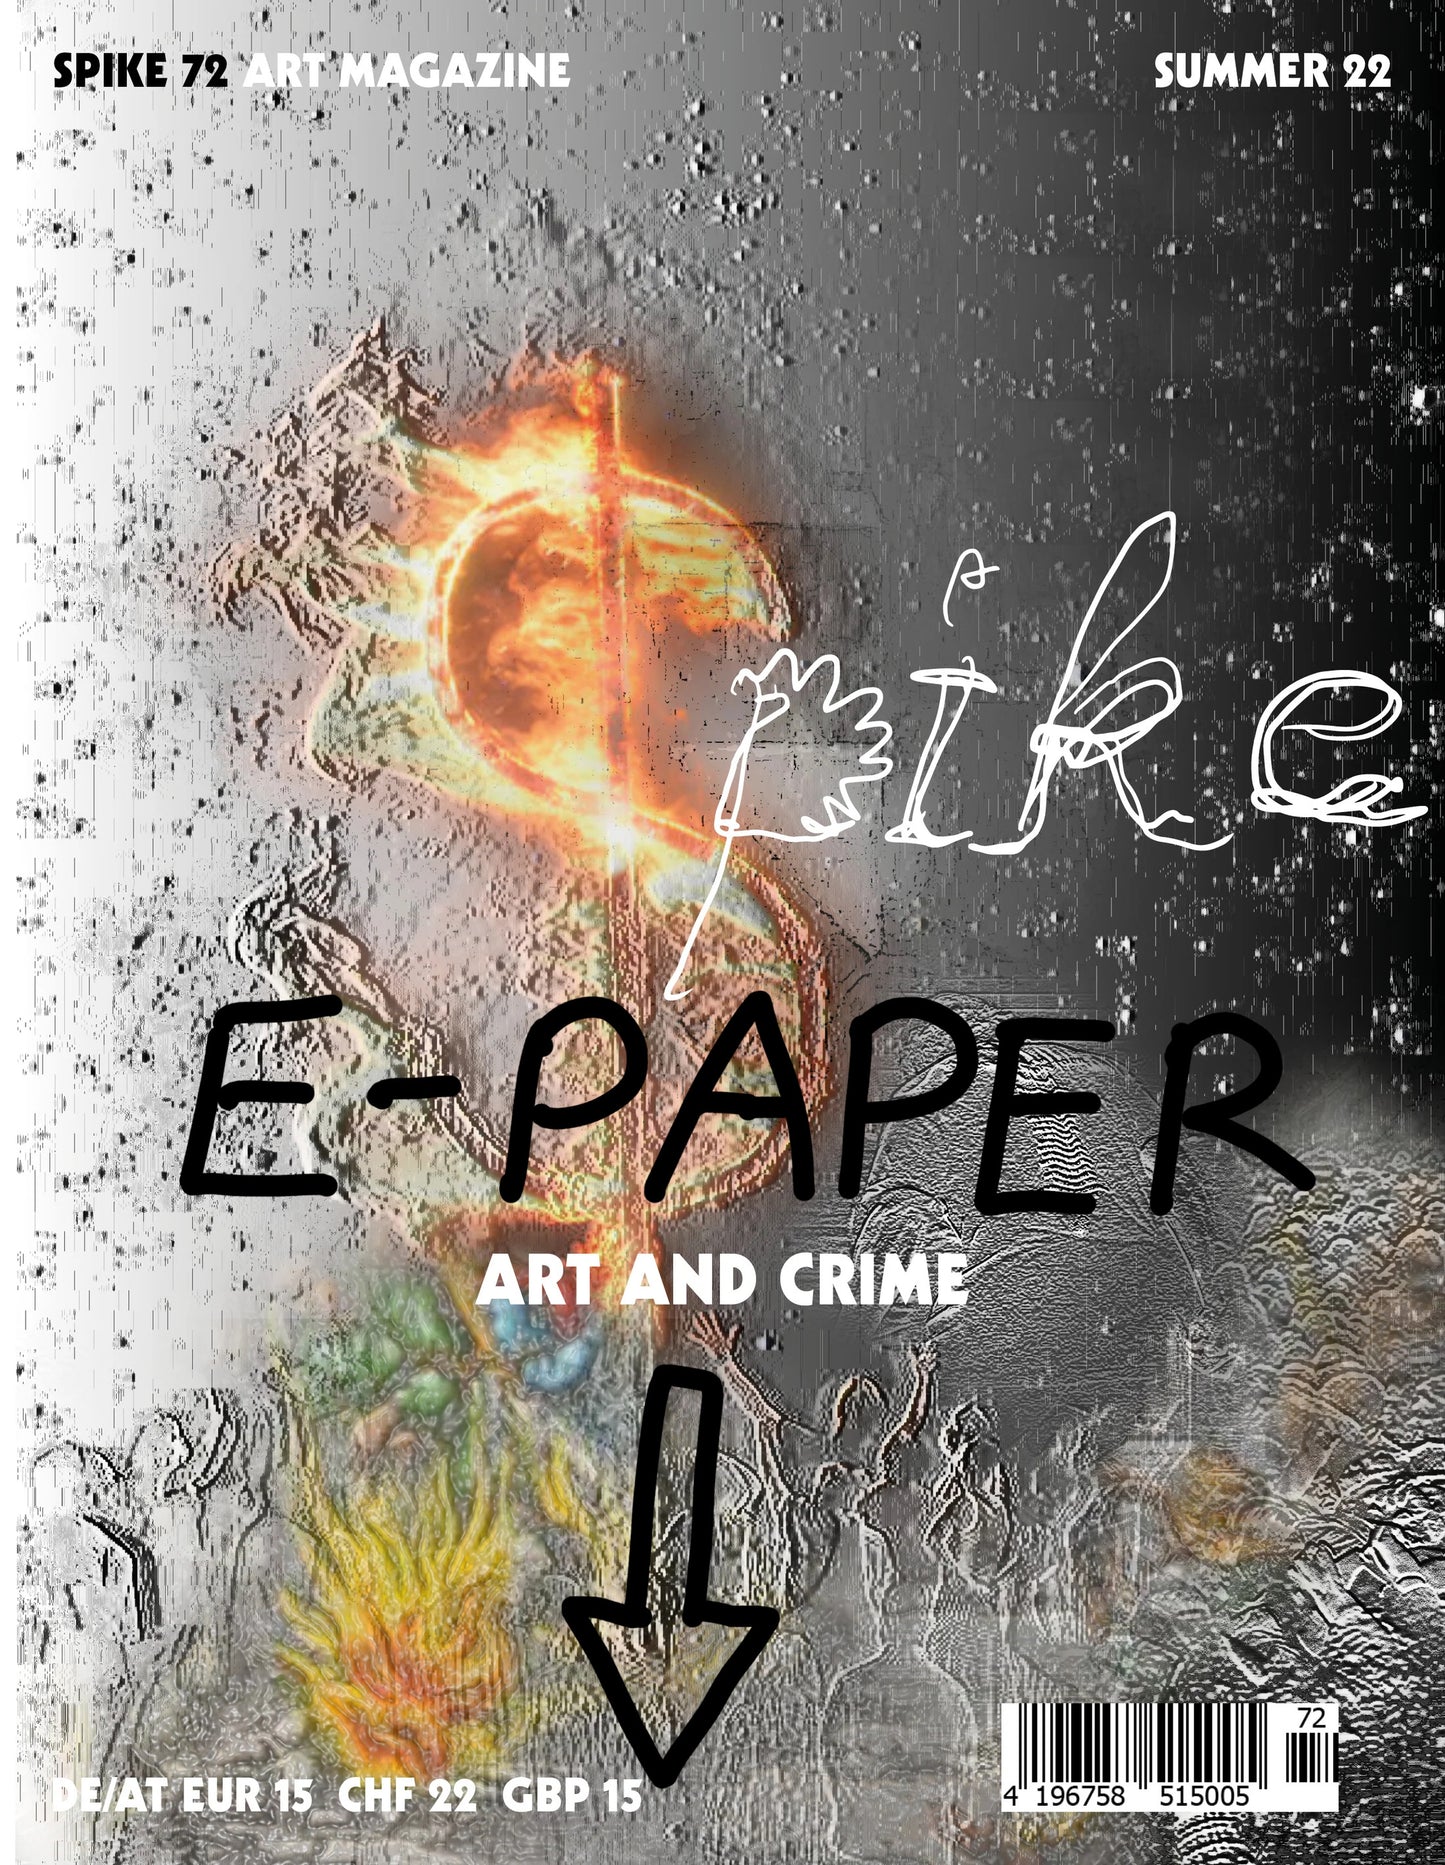 Spike ePaper (ISSUE 72): Art and Crime